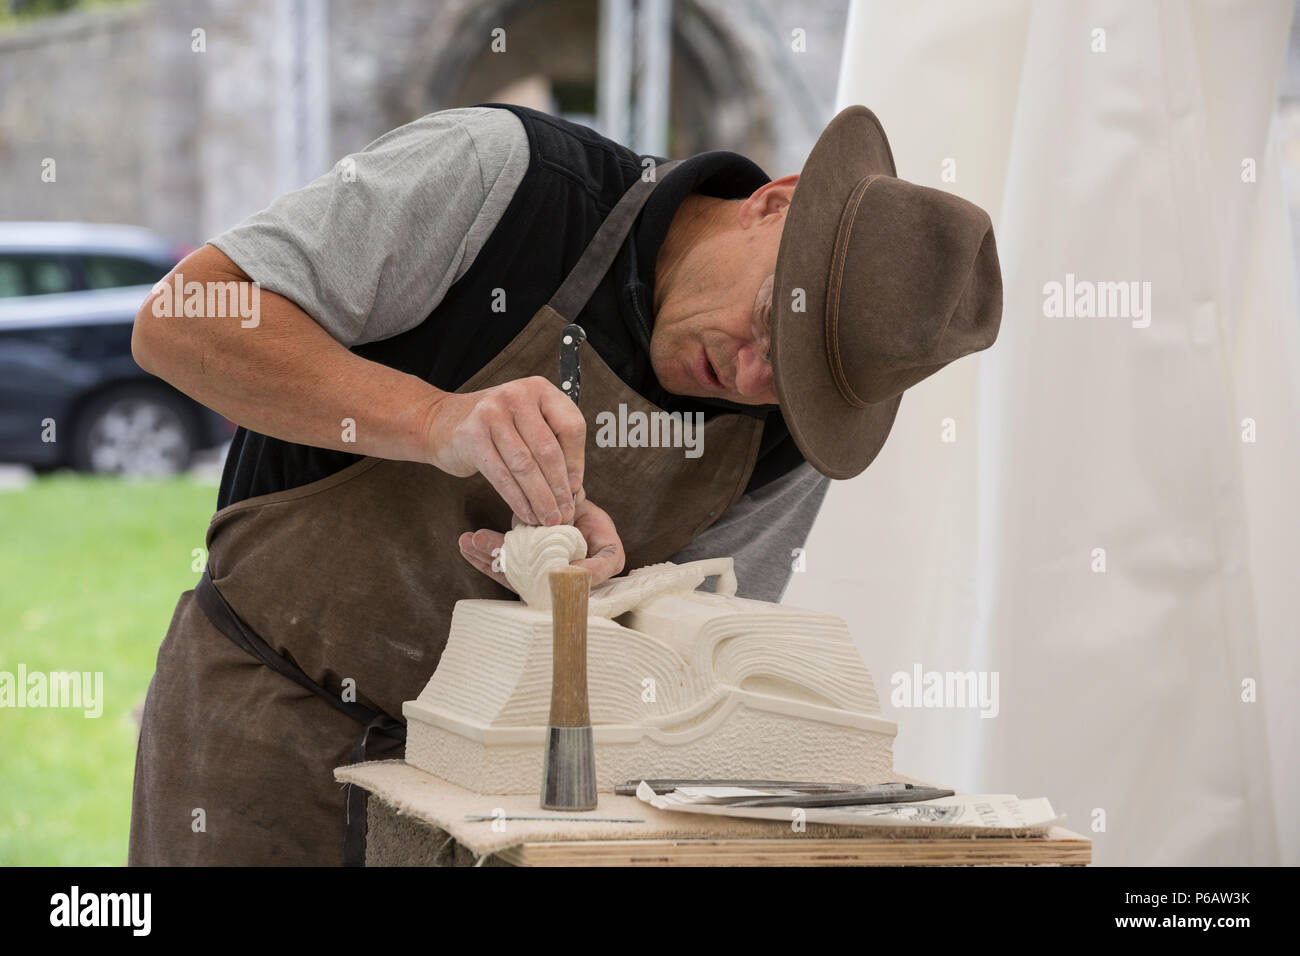 Winchester Cathedral Stone Festival. Masons from around the country will gather within the Inner Close of the Cathedral and carve sculptures, Hants UK Stock Photo